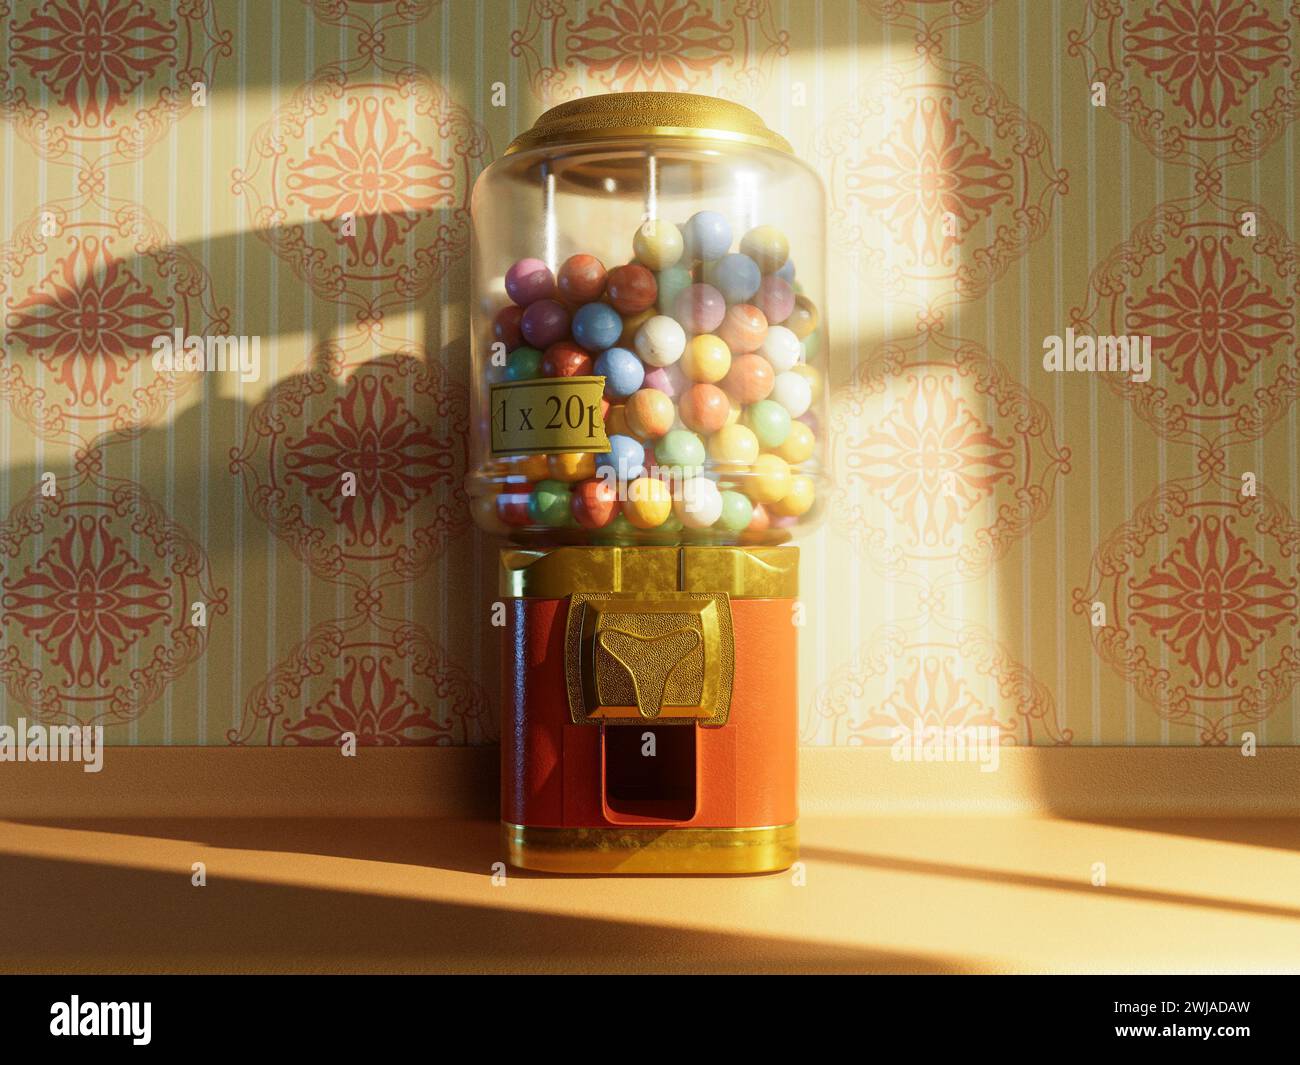 A red and brass vintage gumball dispensing machine filled with multicolored gumballs on a shelf mounted on a retro 60's wallpaper - 3D render Stock Photo